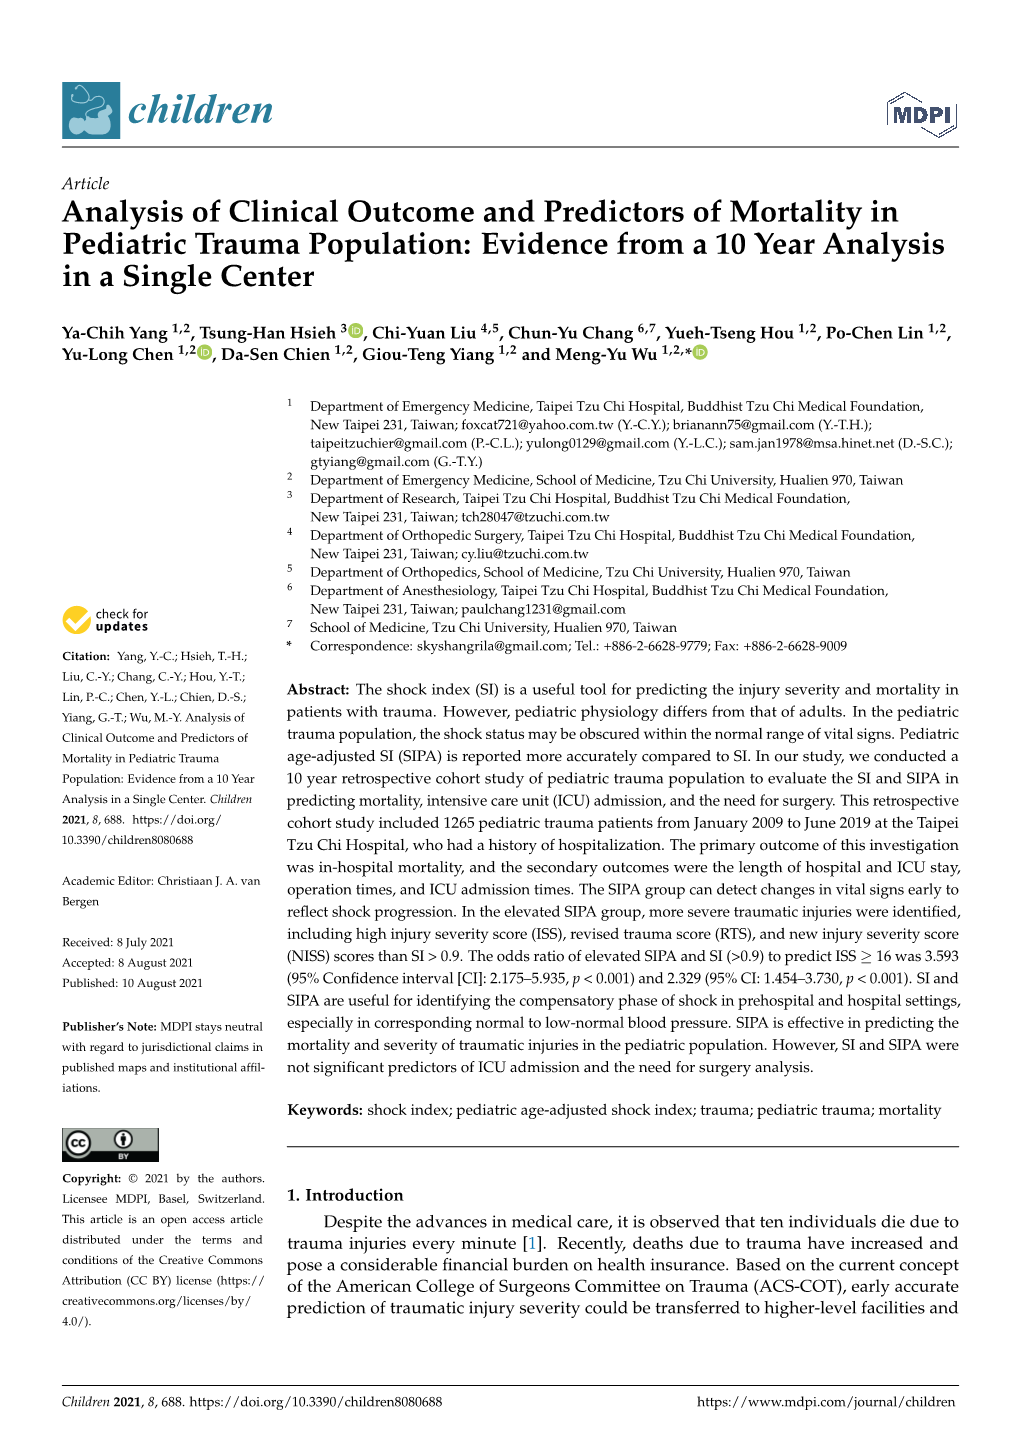 Analysis of Clinical Outcome and Predictors of Mortality in Pediatric Trauma Population: Evidence from a 10 Year Analysis in a Single Center